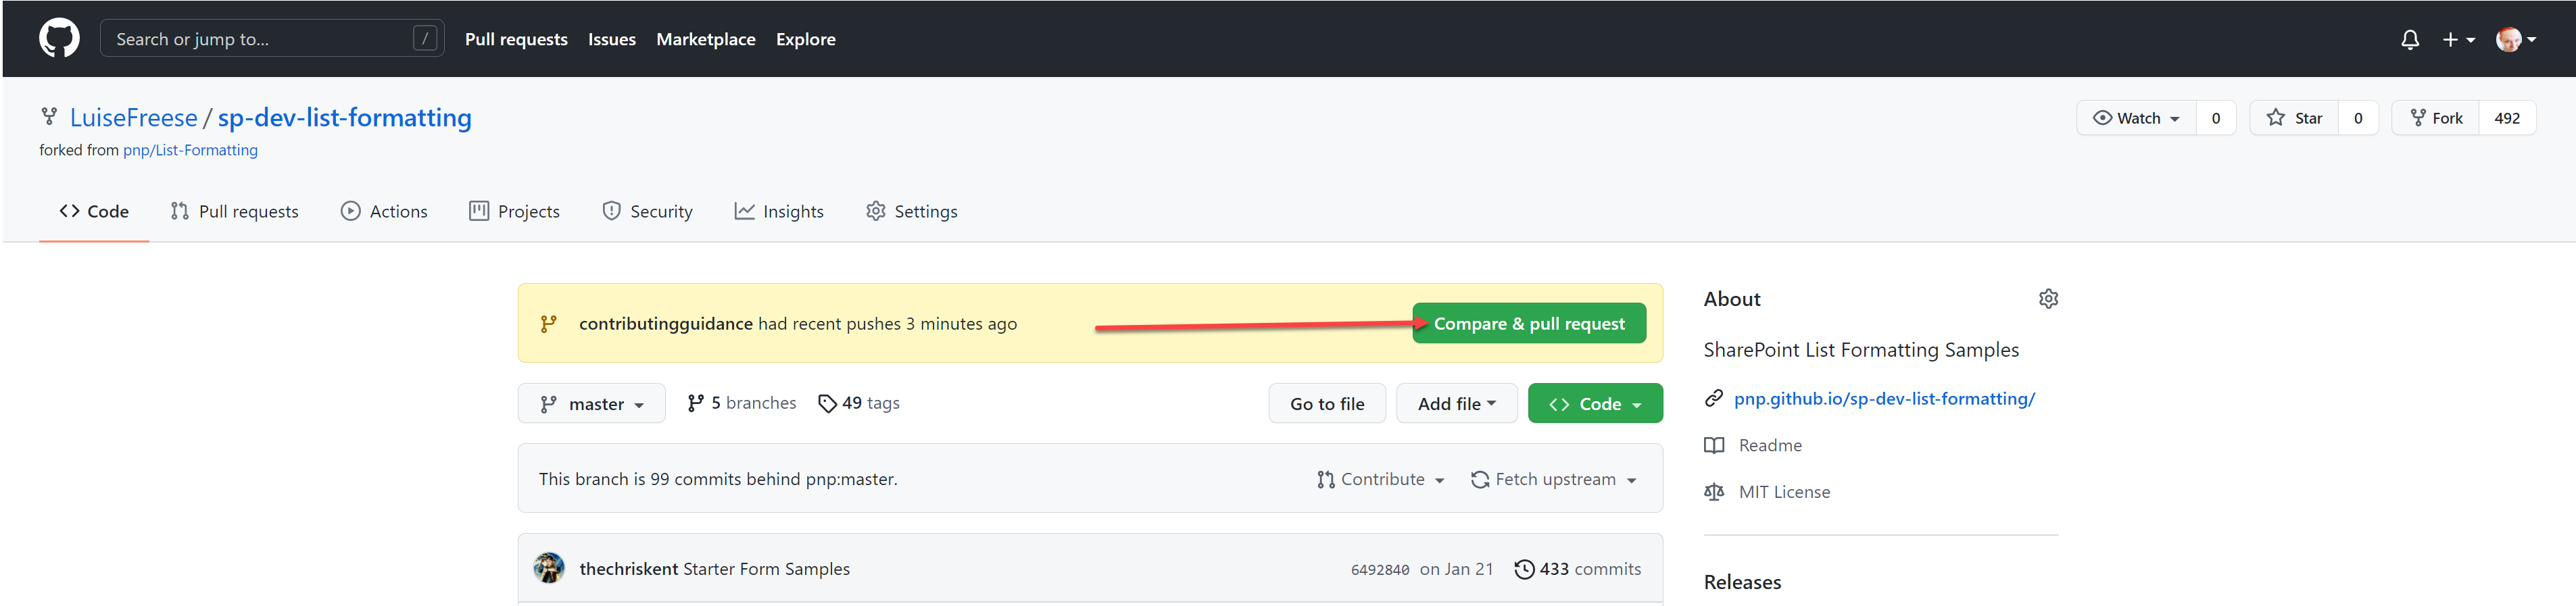 compare and pull request